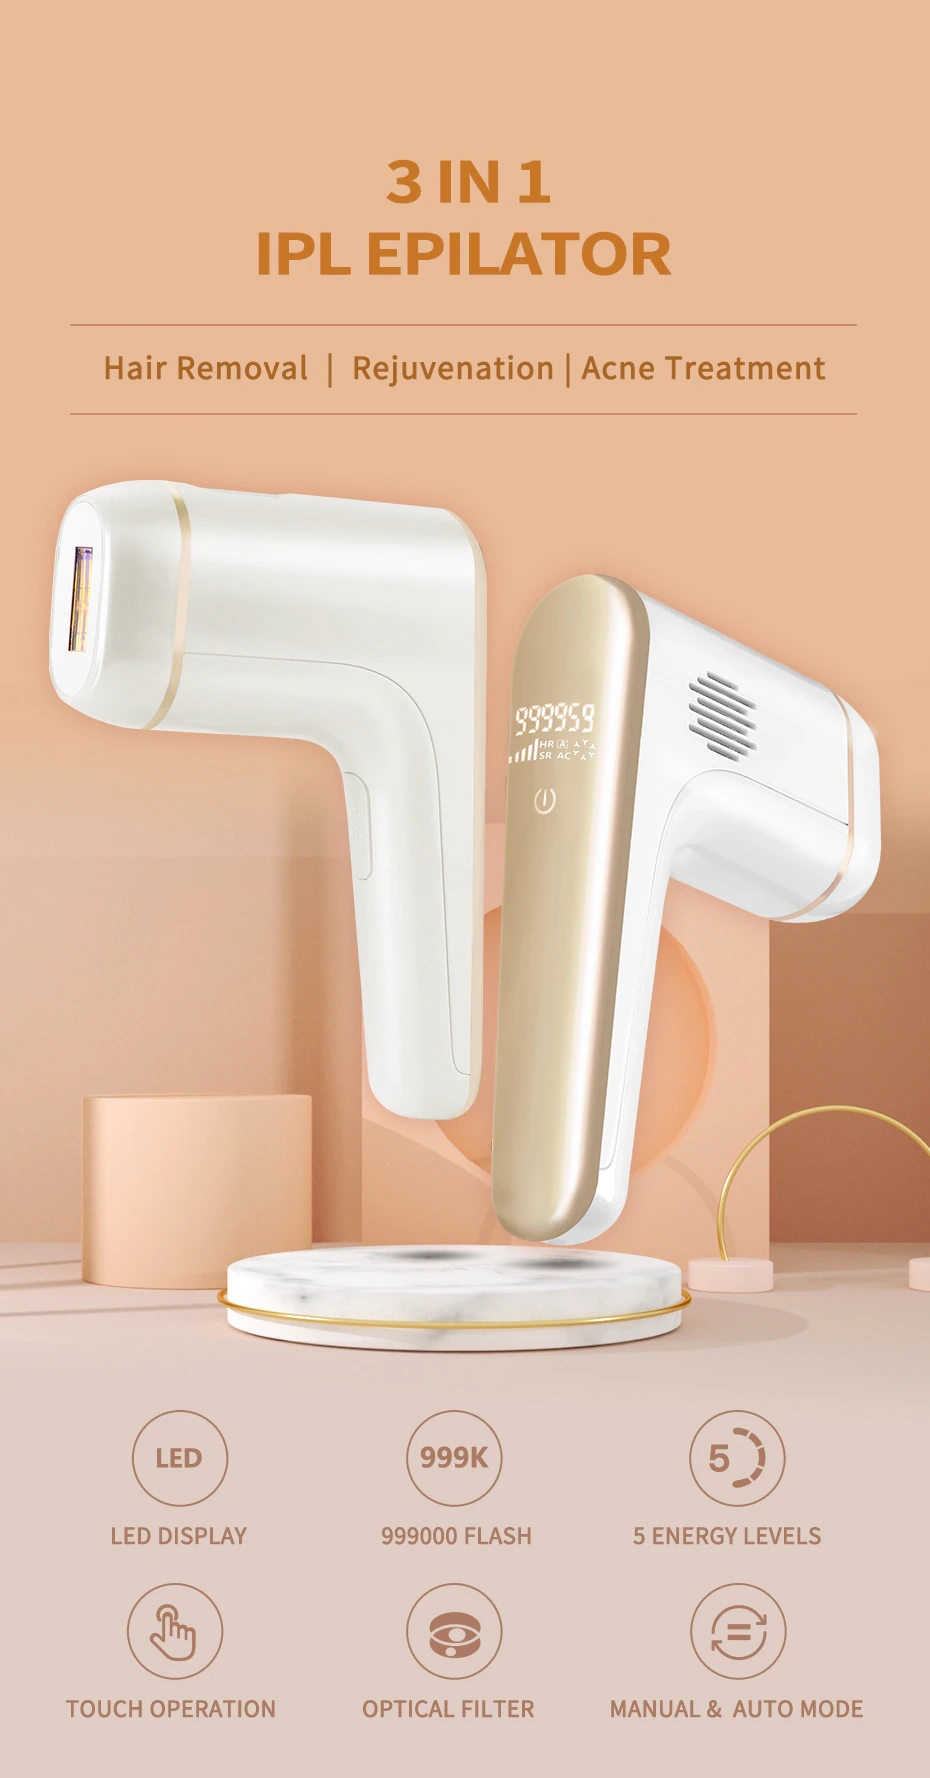 Laser hair removal and acne treatment machine